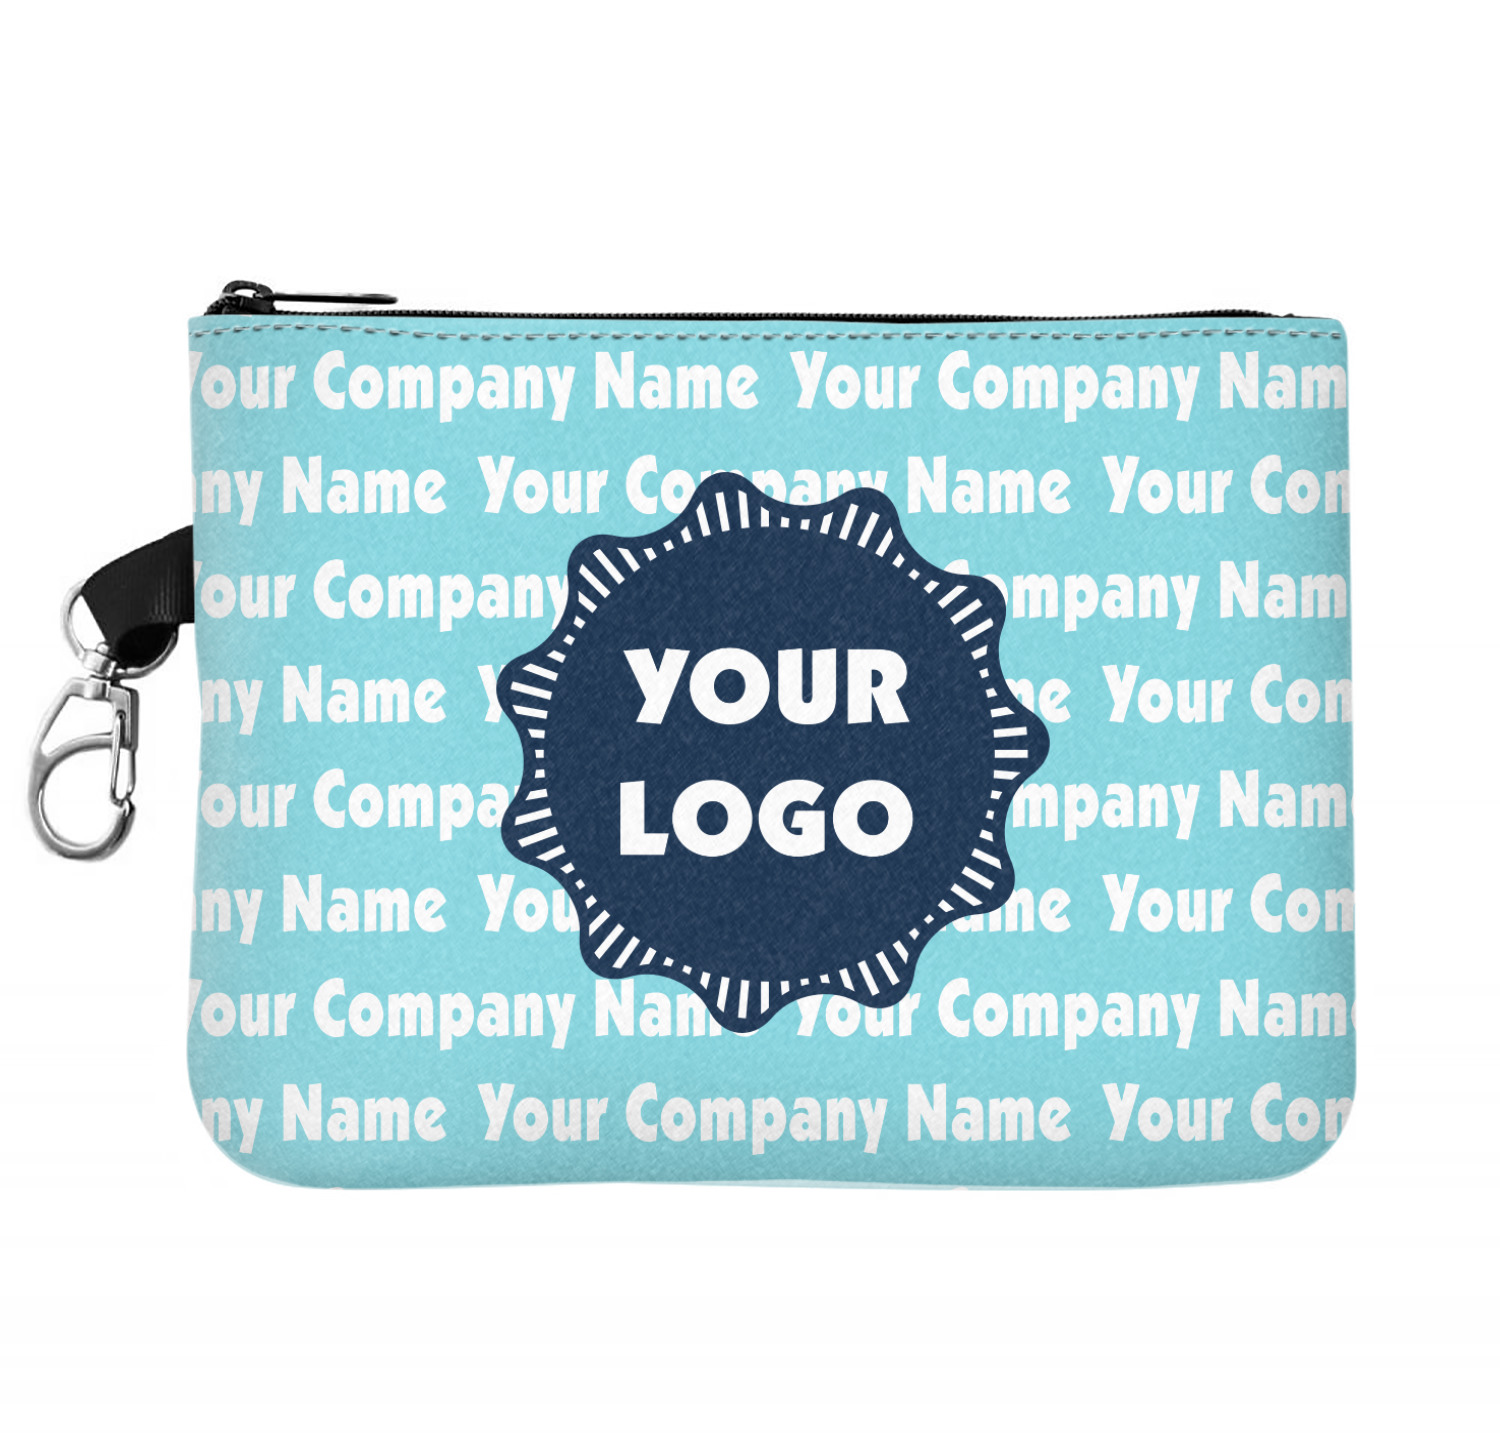 Logo & Company Name Golf Accessories Bag - Front & Back (Personalized) - YouCustomizeIt